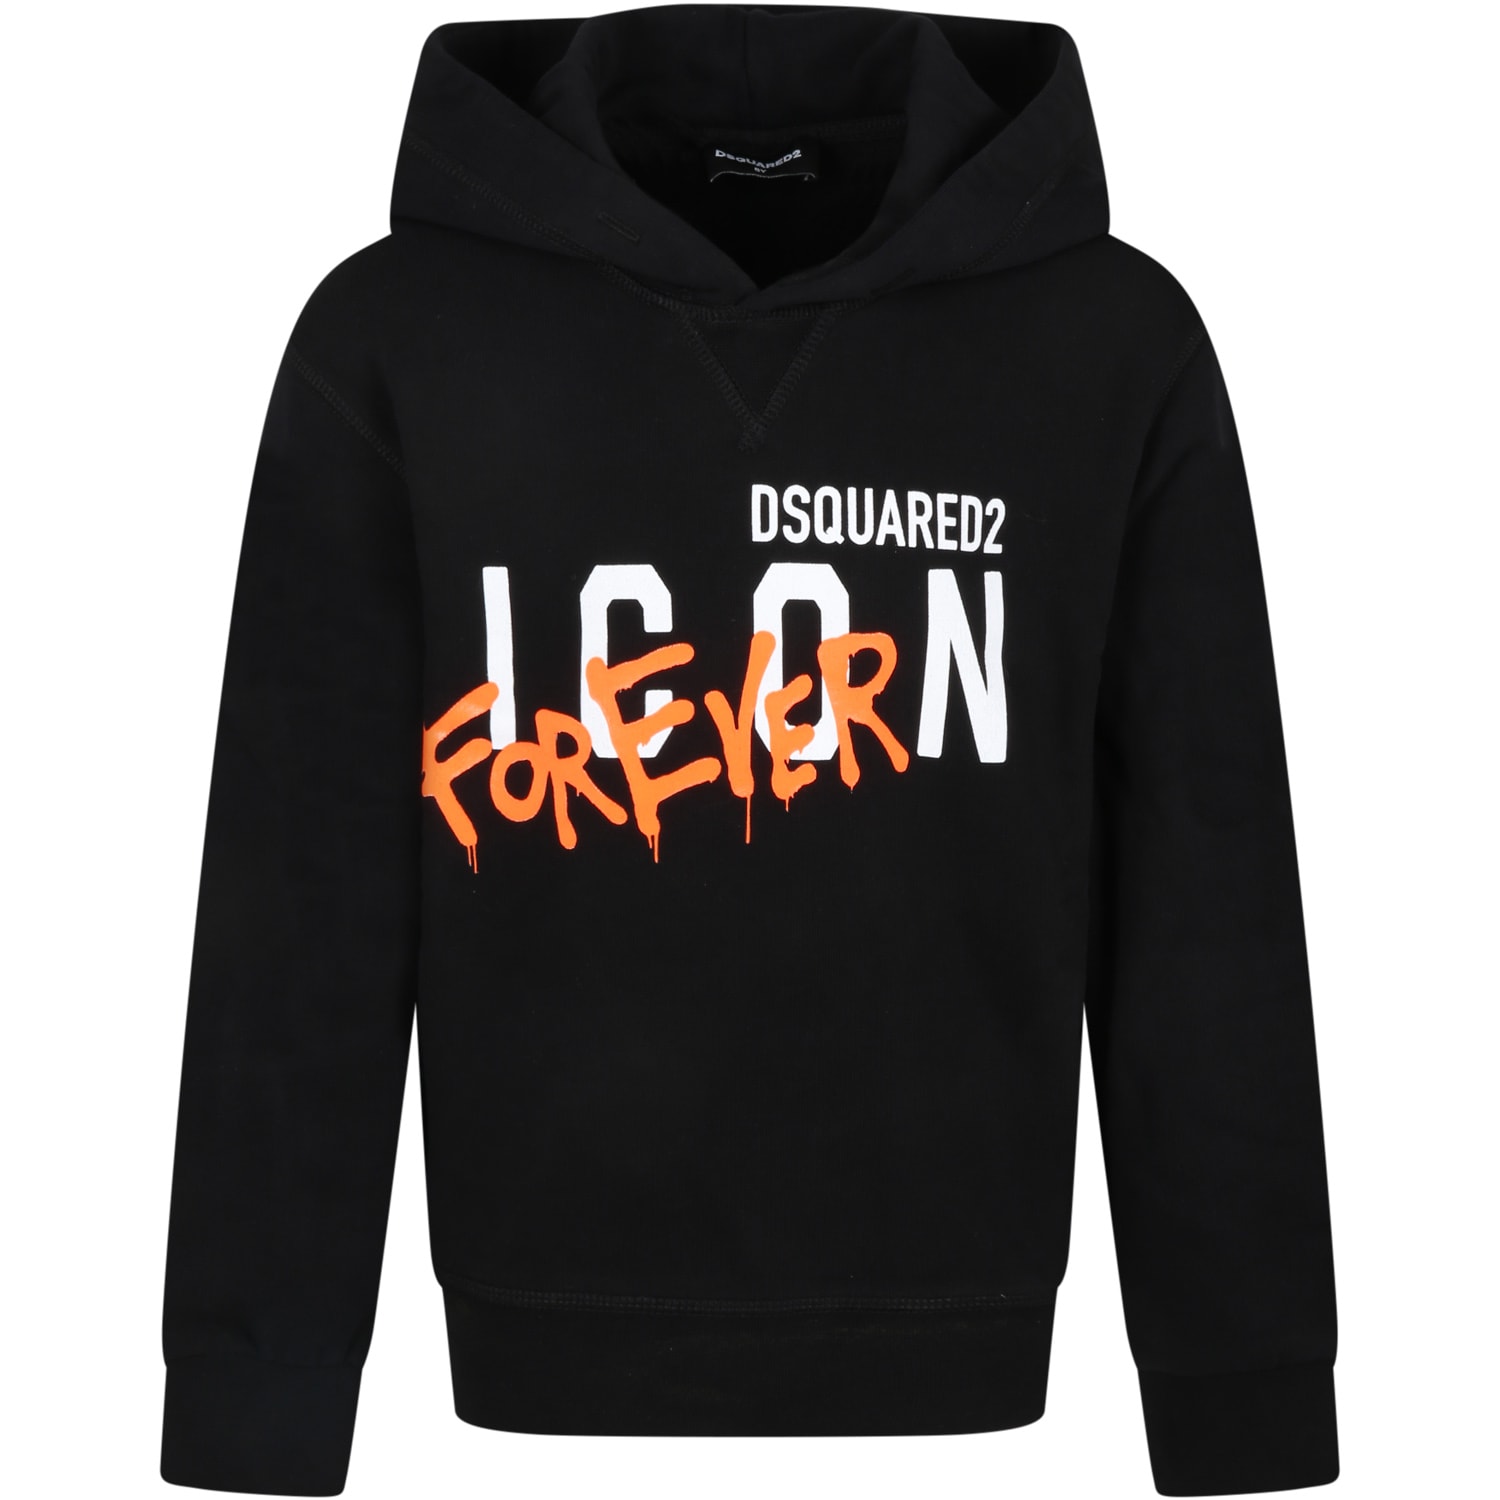 Dsquared2 Black Sweatshirt For Kids With Writing